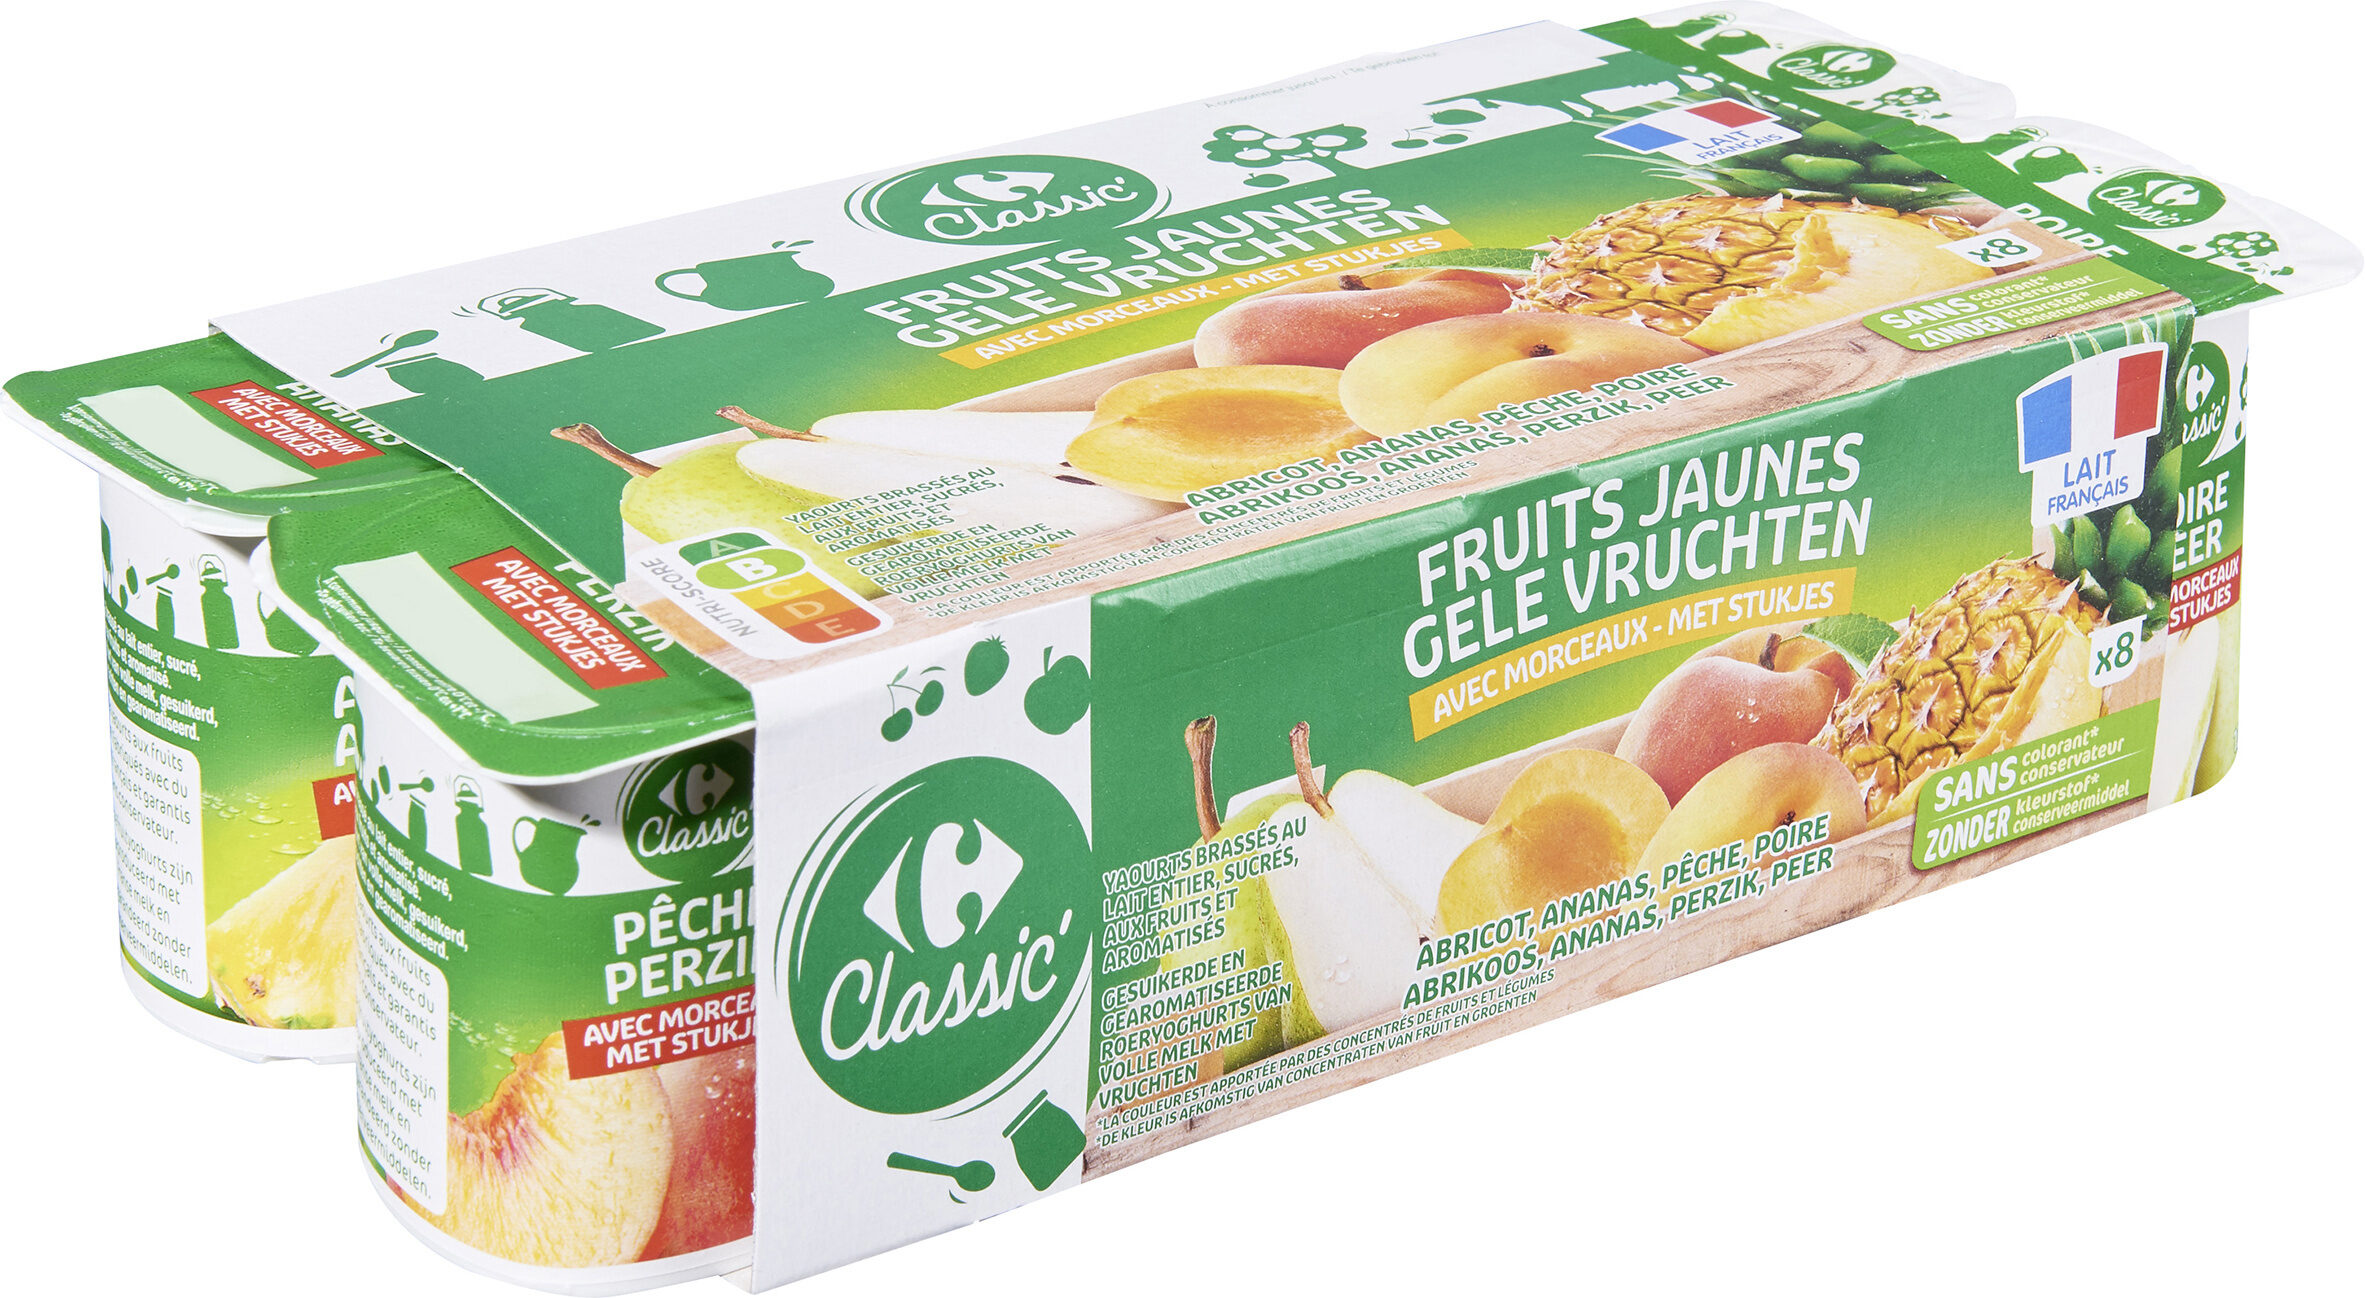 Abricot Ananas Pêche Poire - Product - fr